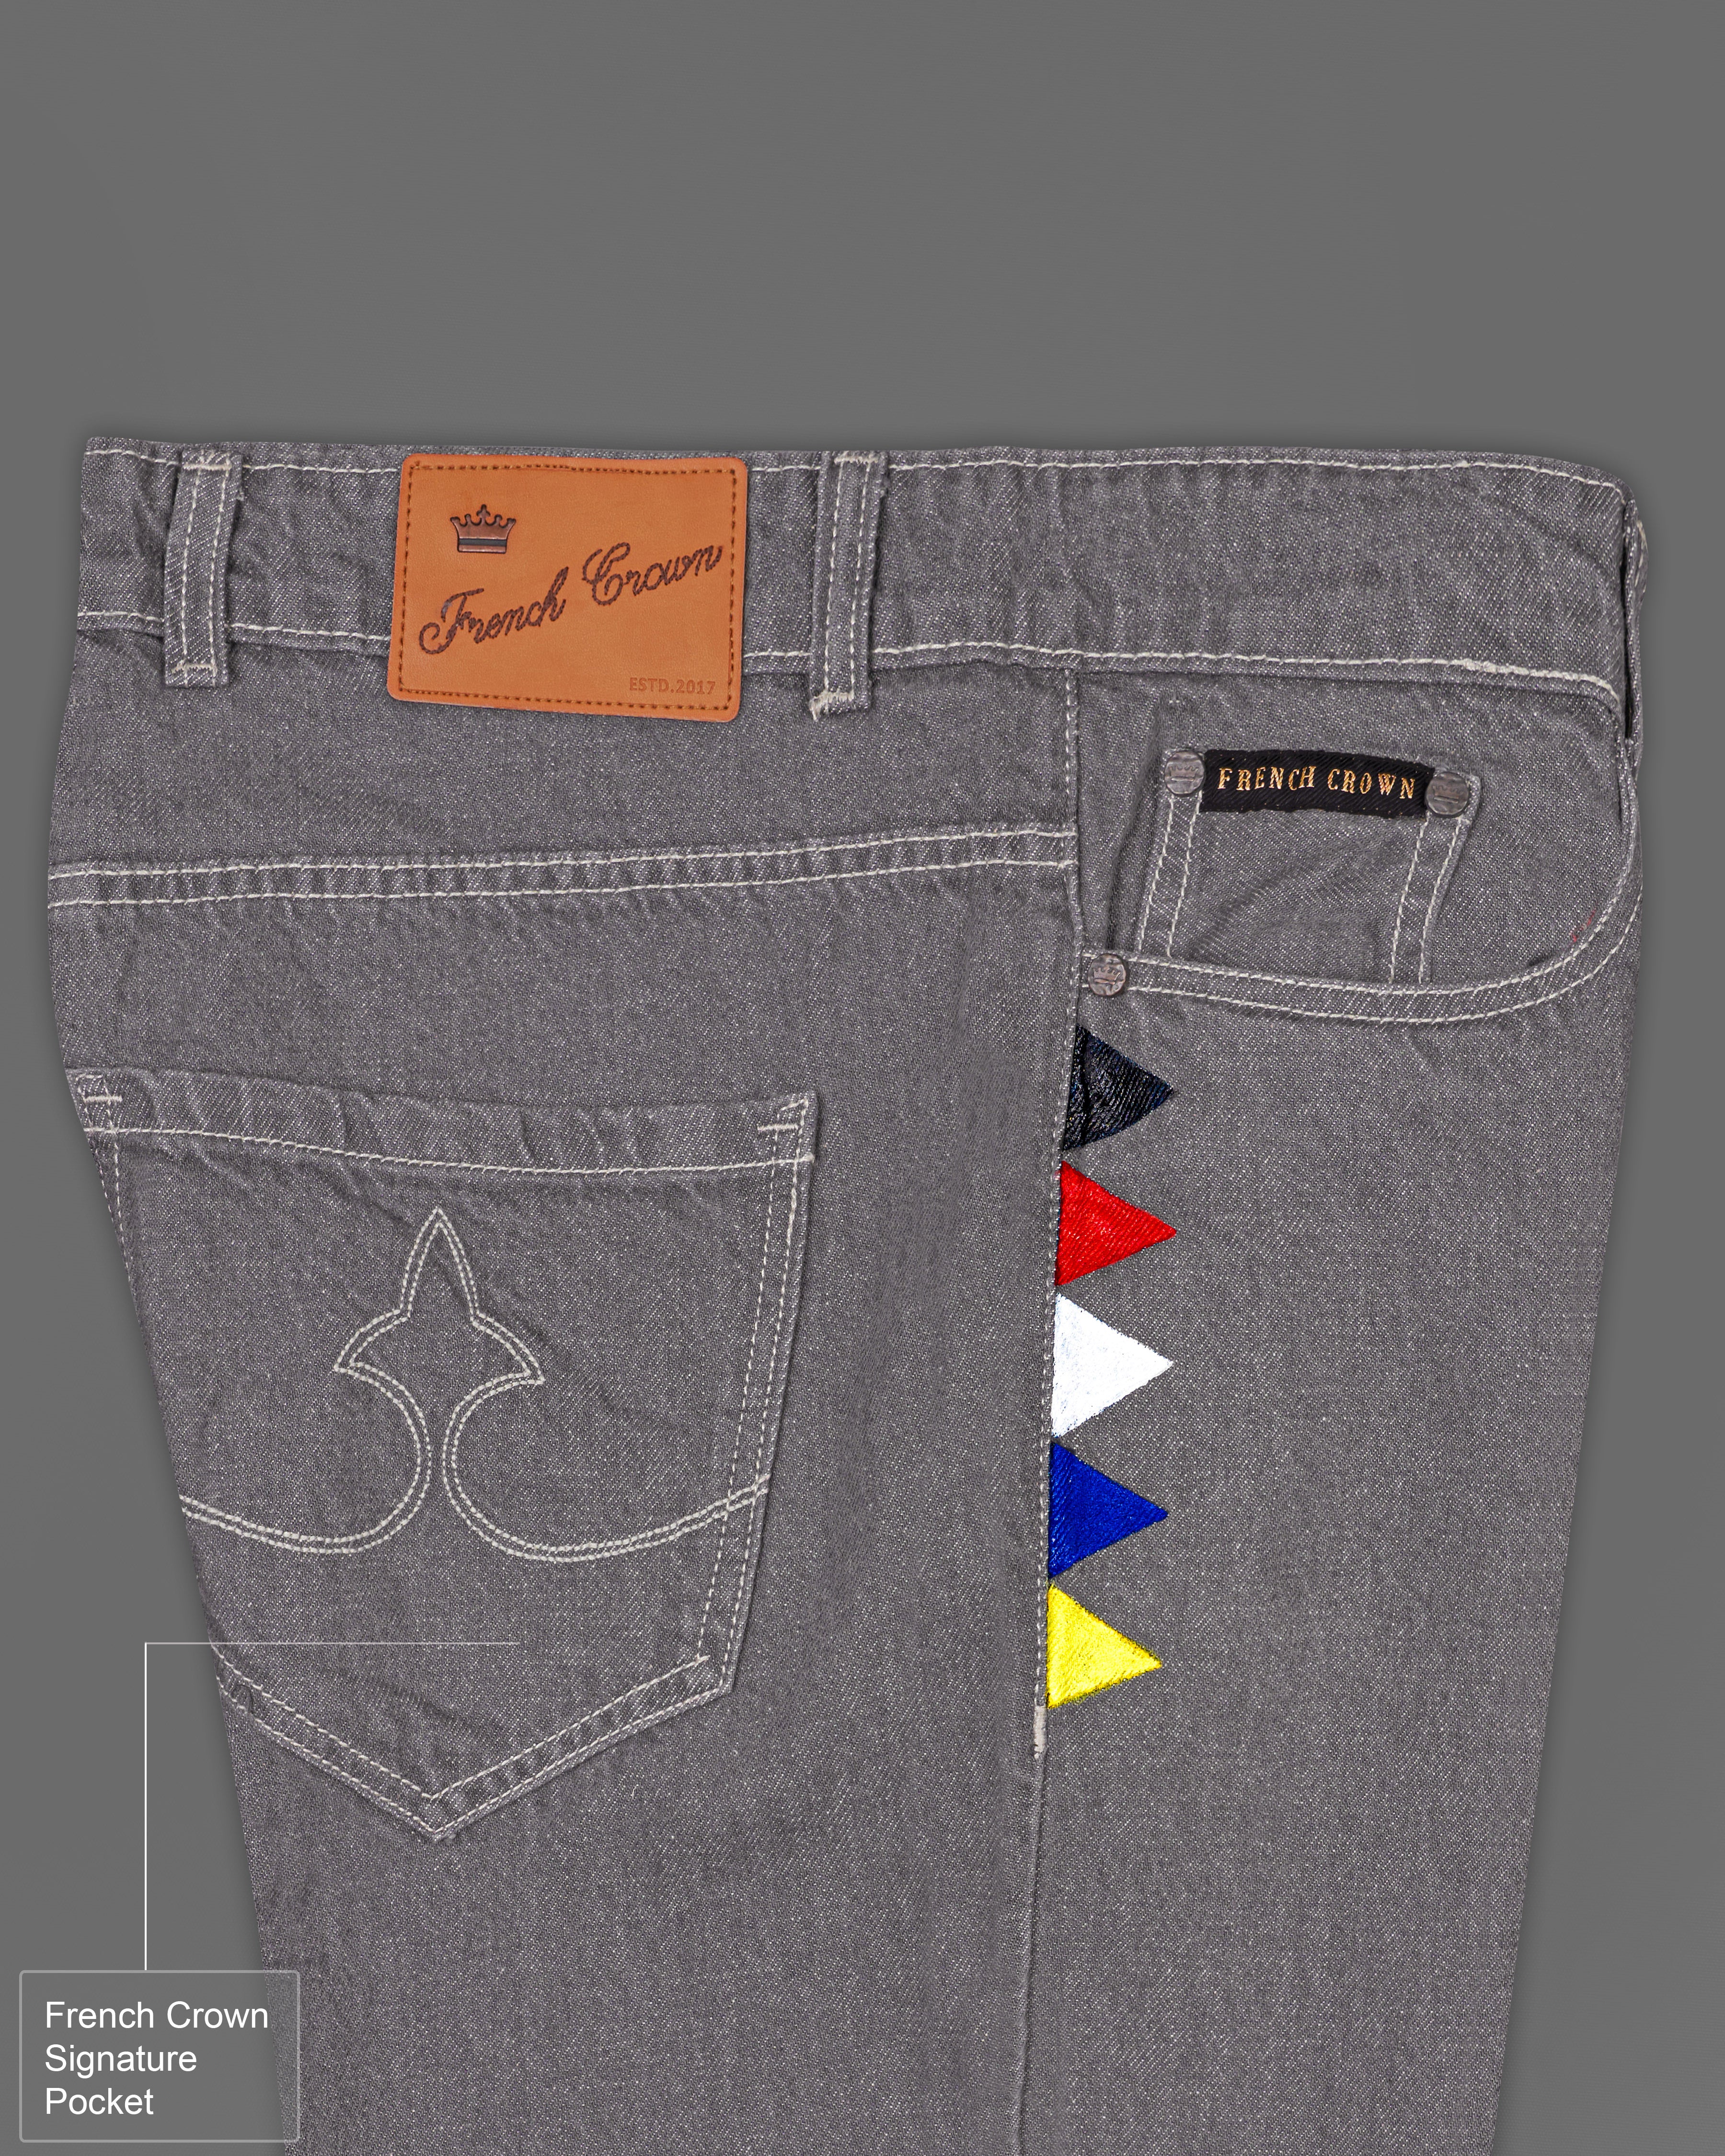 Flint Gray Multicolour Hand Painted Rinse Wash Denim J080-ART-32, J080-ART-34, J080-ART-36, J080-ART-38, J080-ART-40\